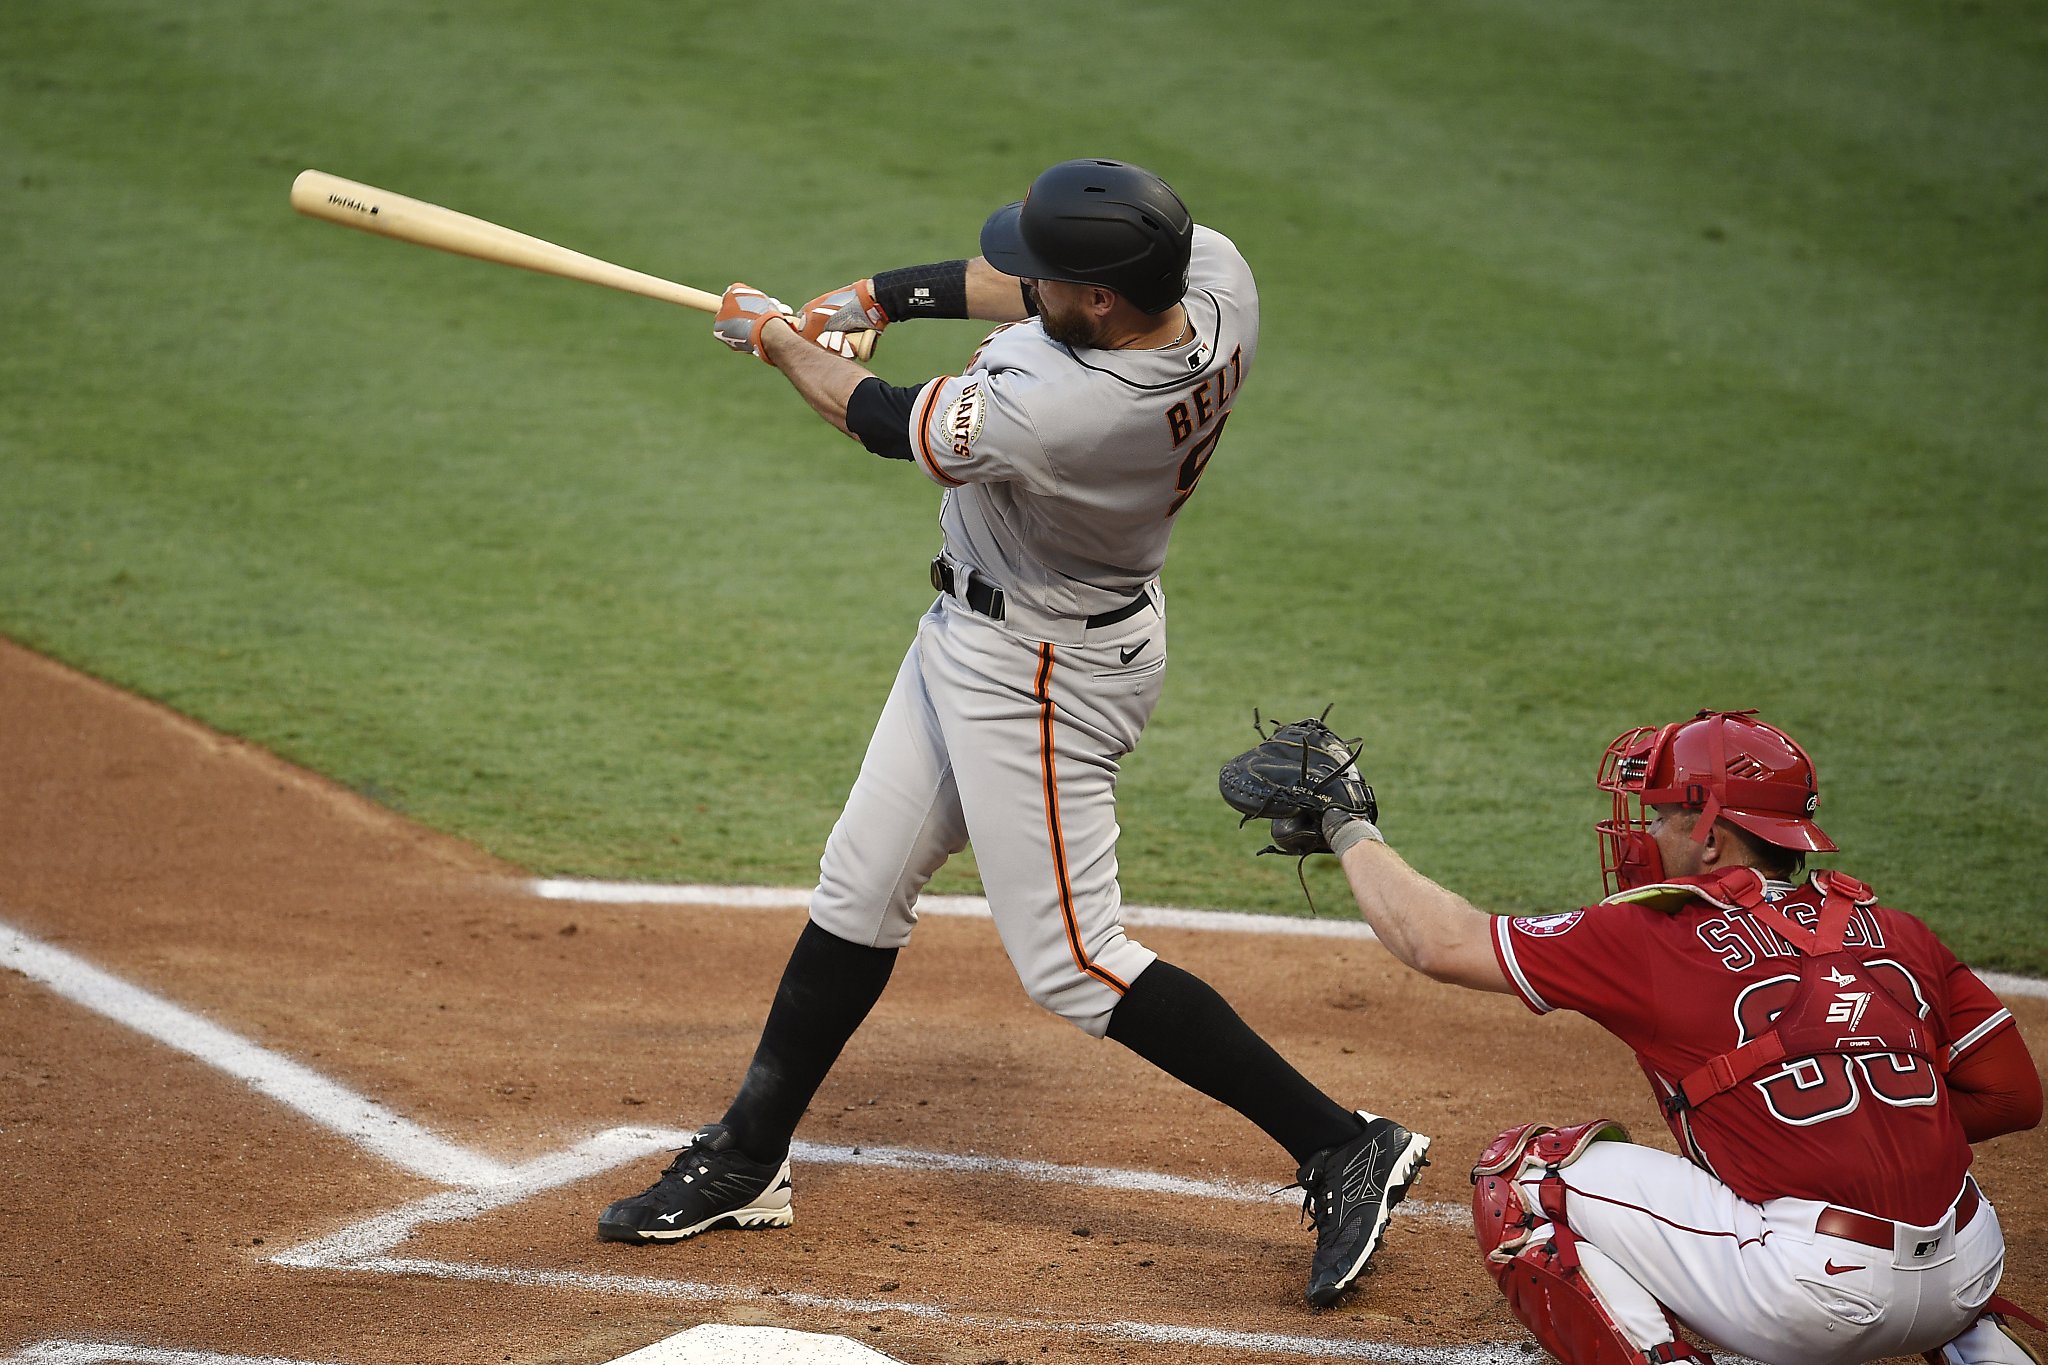 Ninth-inning lightning shocks Giants again — another homer off Gott, another loss